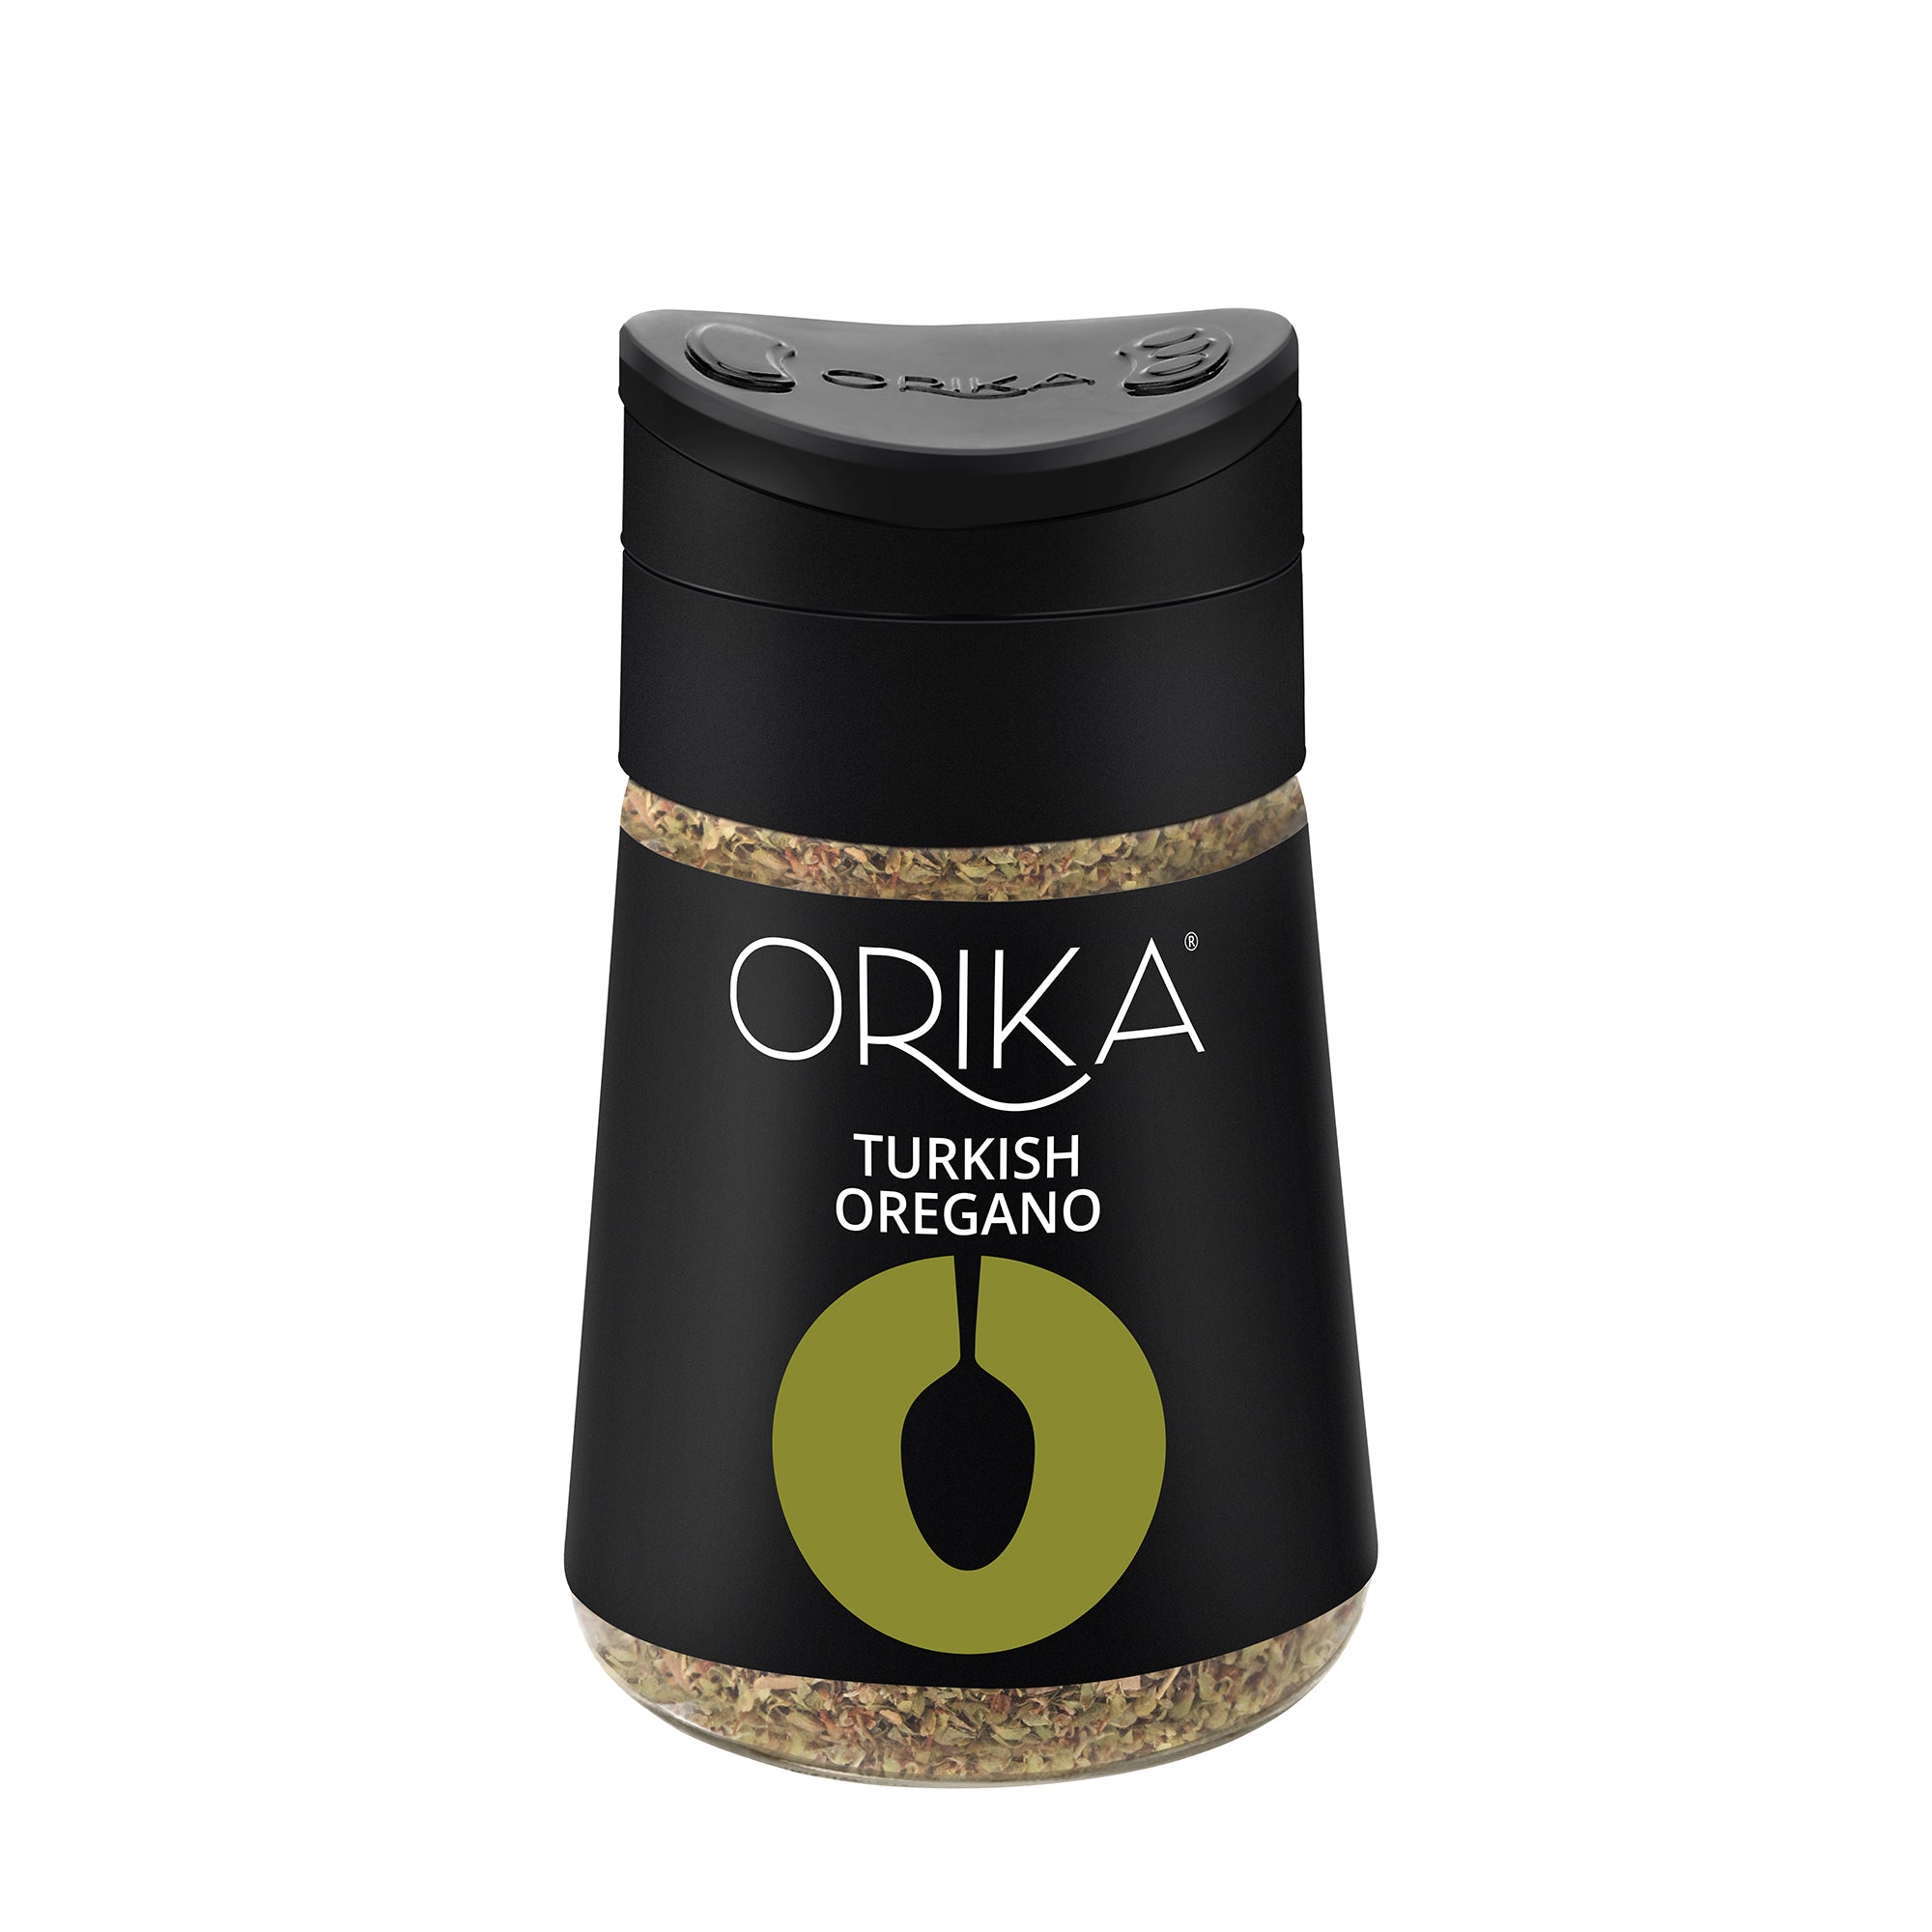 Gourmet herb sprinkler combo - Orika Spices India